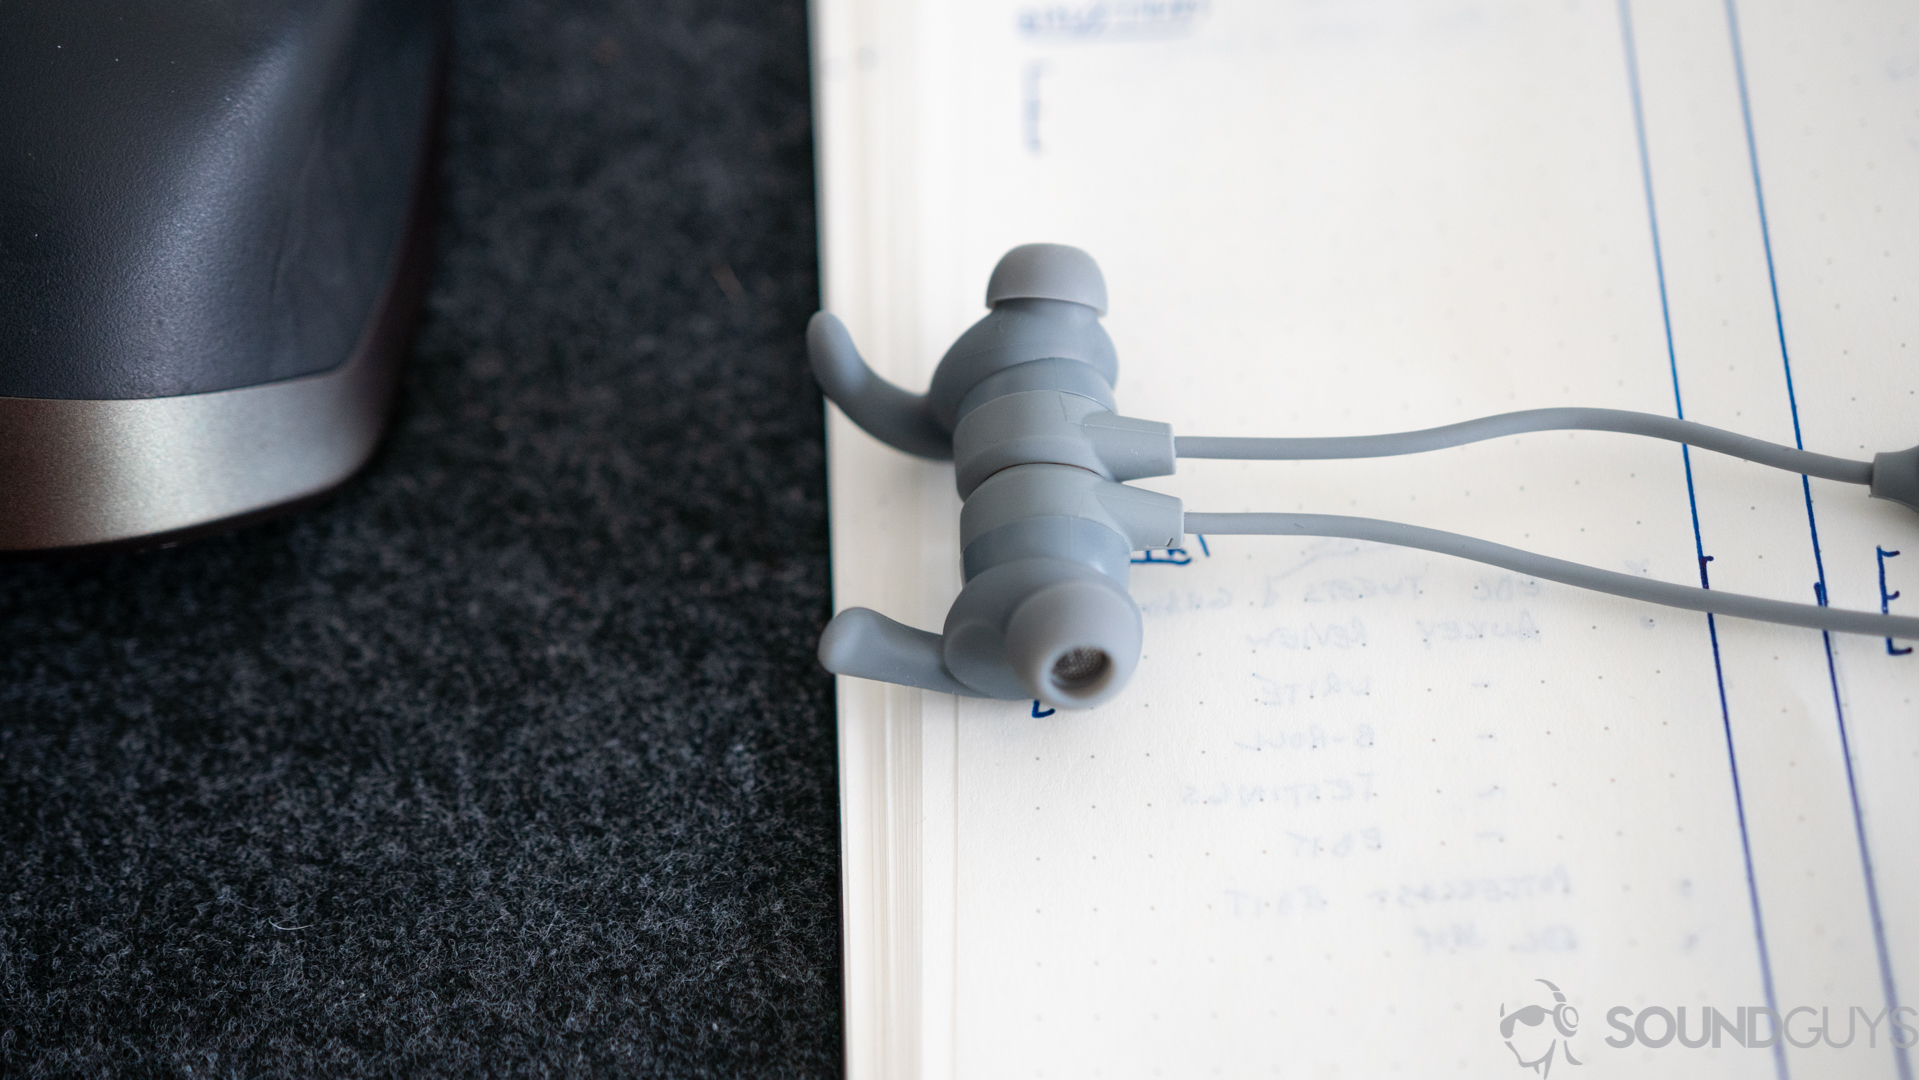 Pictured is the magnetic earbuds of the EP-B60.